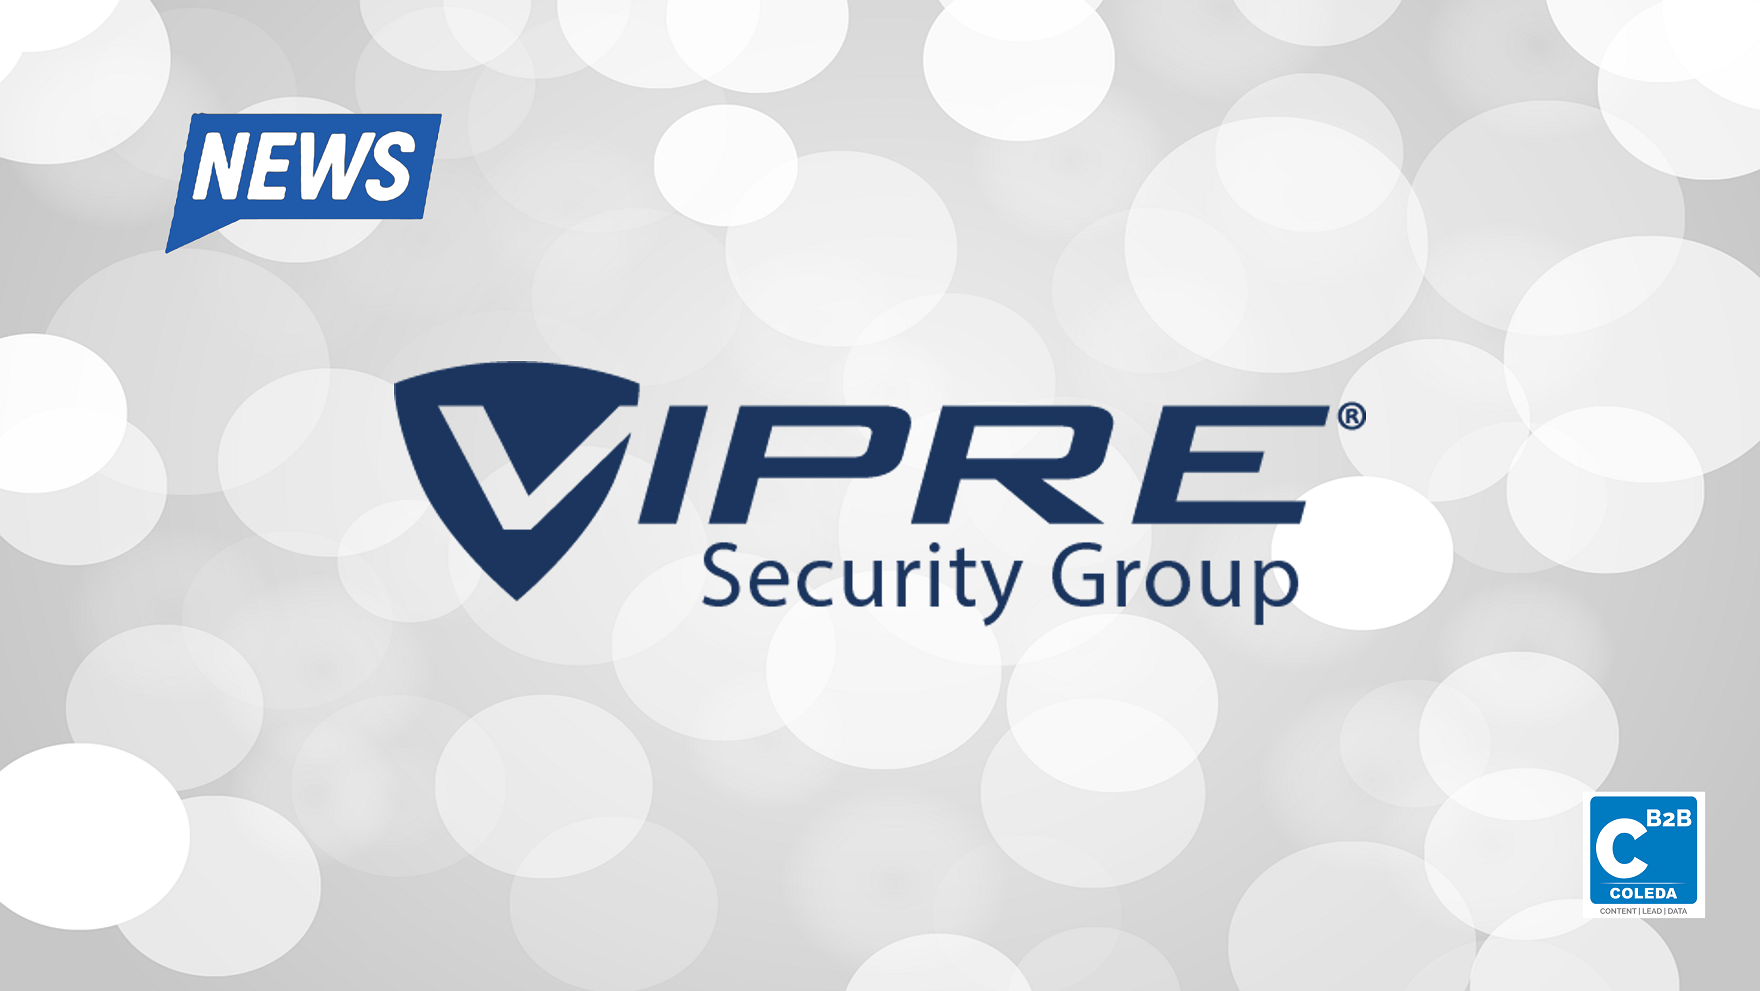 VIPRE Security group receives highest 5-star rating from CRN